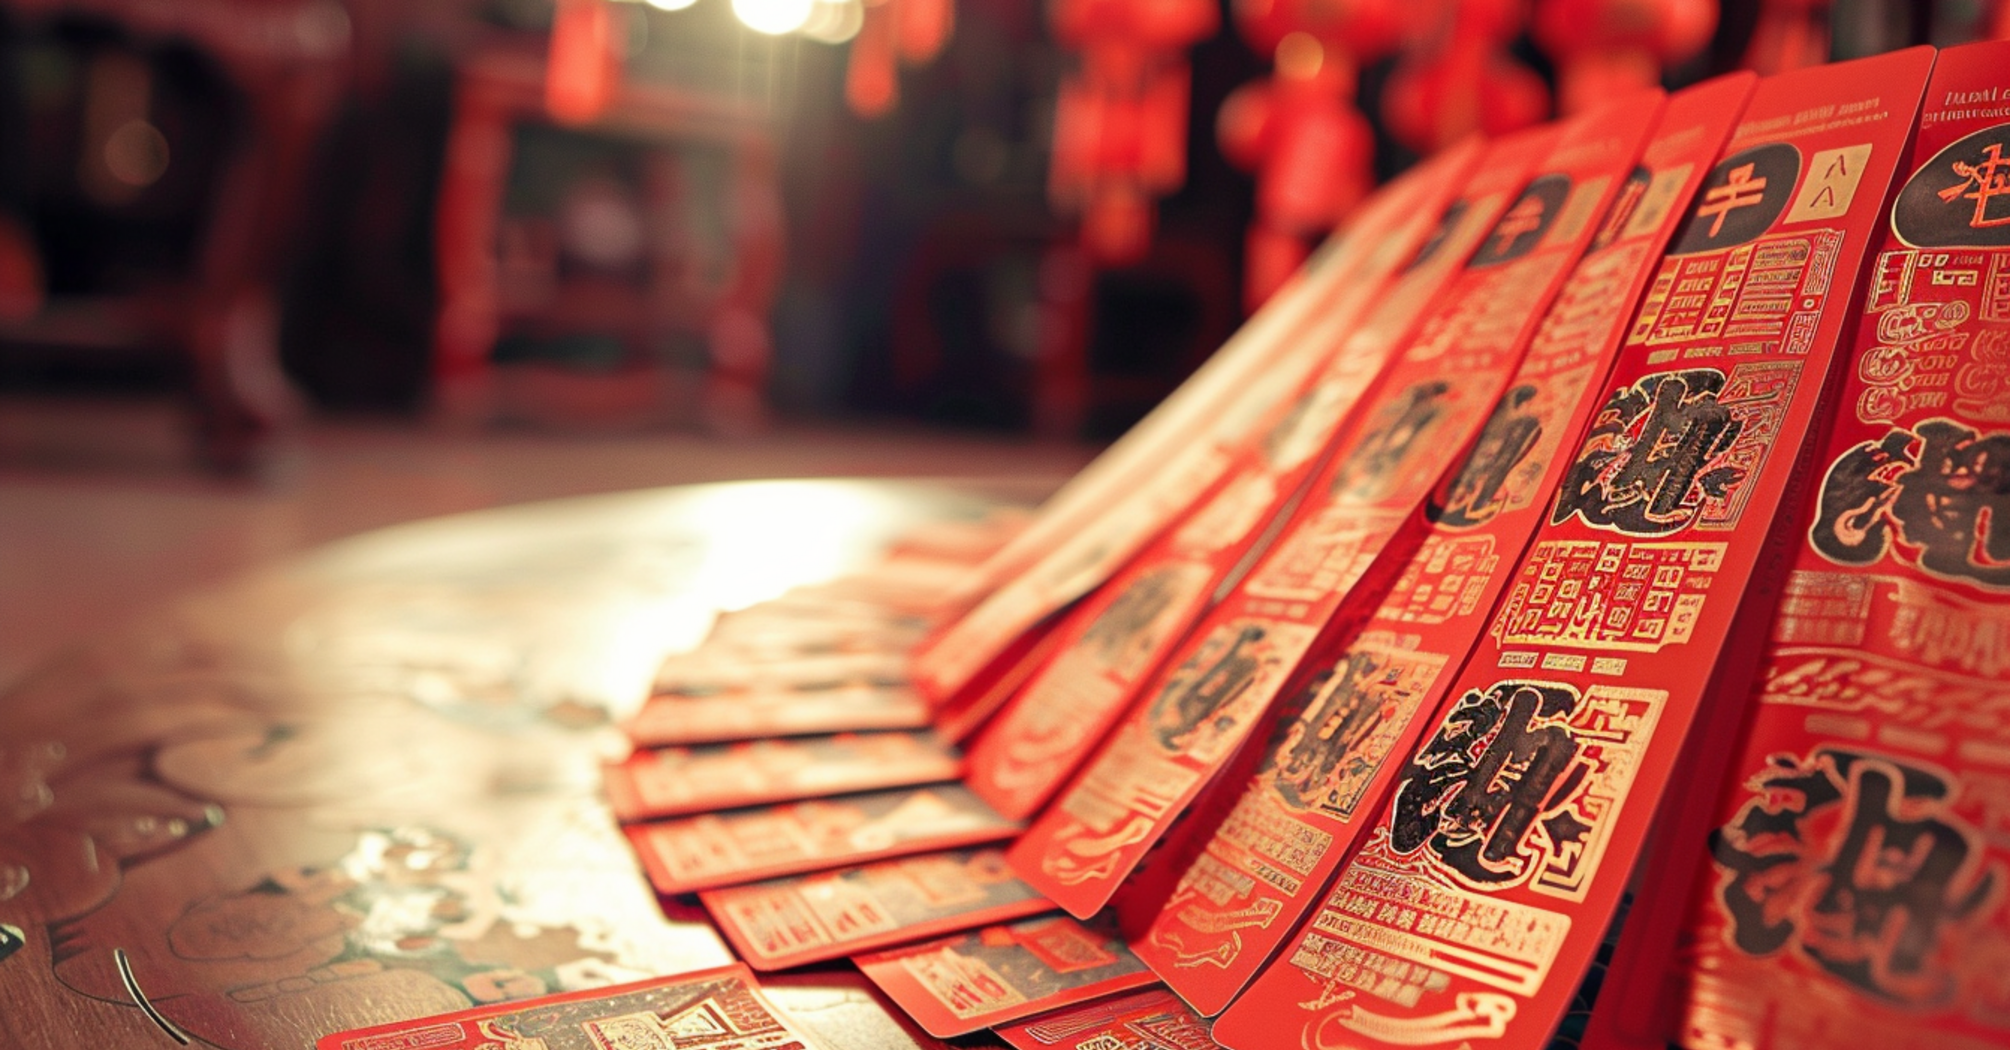 A day of emotional stability and contentment: Chinese horoscope for June 15